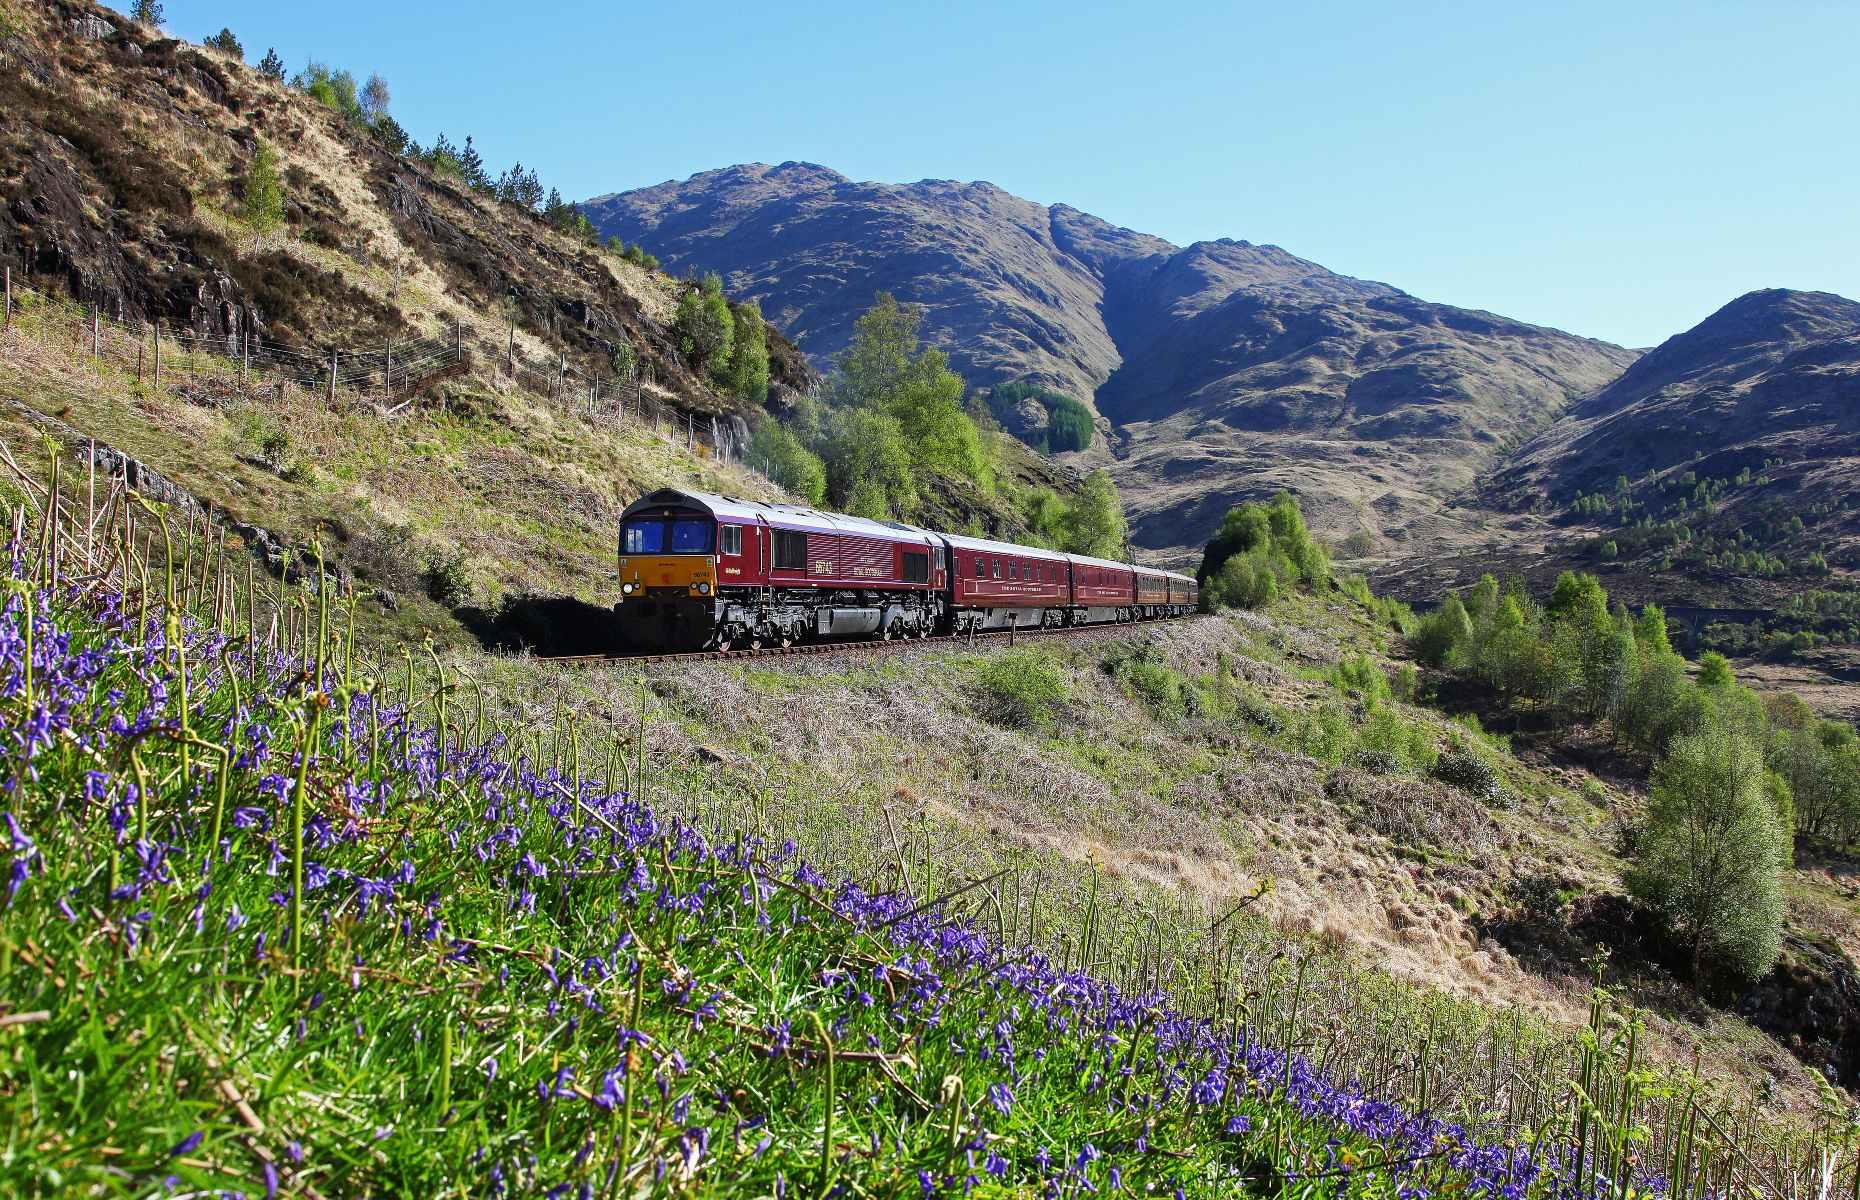 <p><a href="https://www.belmond.com/trains/europe/scotland/belmond-royal-scotsman/journeys/scotlands-classic-splendour">Scotland’s Classic Splendours Tour</a> is an epic cross-country journey through the heart of Scotland. Passengers step aboard a luxury Royal Scotsman Belmond train for a 720-mile (1,159km) round trip venturing through the middle of the Scottish Highlands. Spread across five days, the journey begins in <a href="https://www.loveexploring.com/guides/79636/explore-edinburgh-places-to-see-what-to-do-and-where-to-stay">Edinburgh</a>, taking in cities including Dundee, Inverness, Montrose and Perth before looping back to the capital. The train also passes through the Cairngorms National Park, the largest in the UK, and the famous Forth Bridge, one of the greatest crossings in the world. </p>